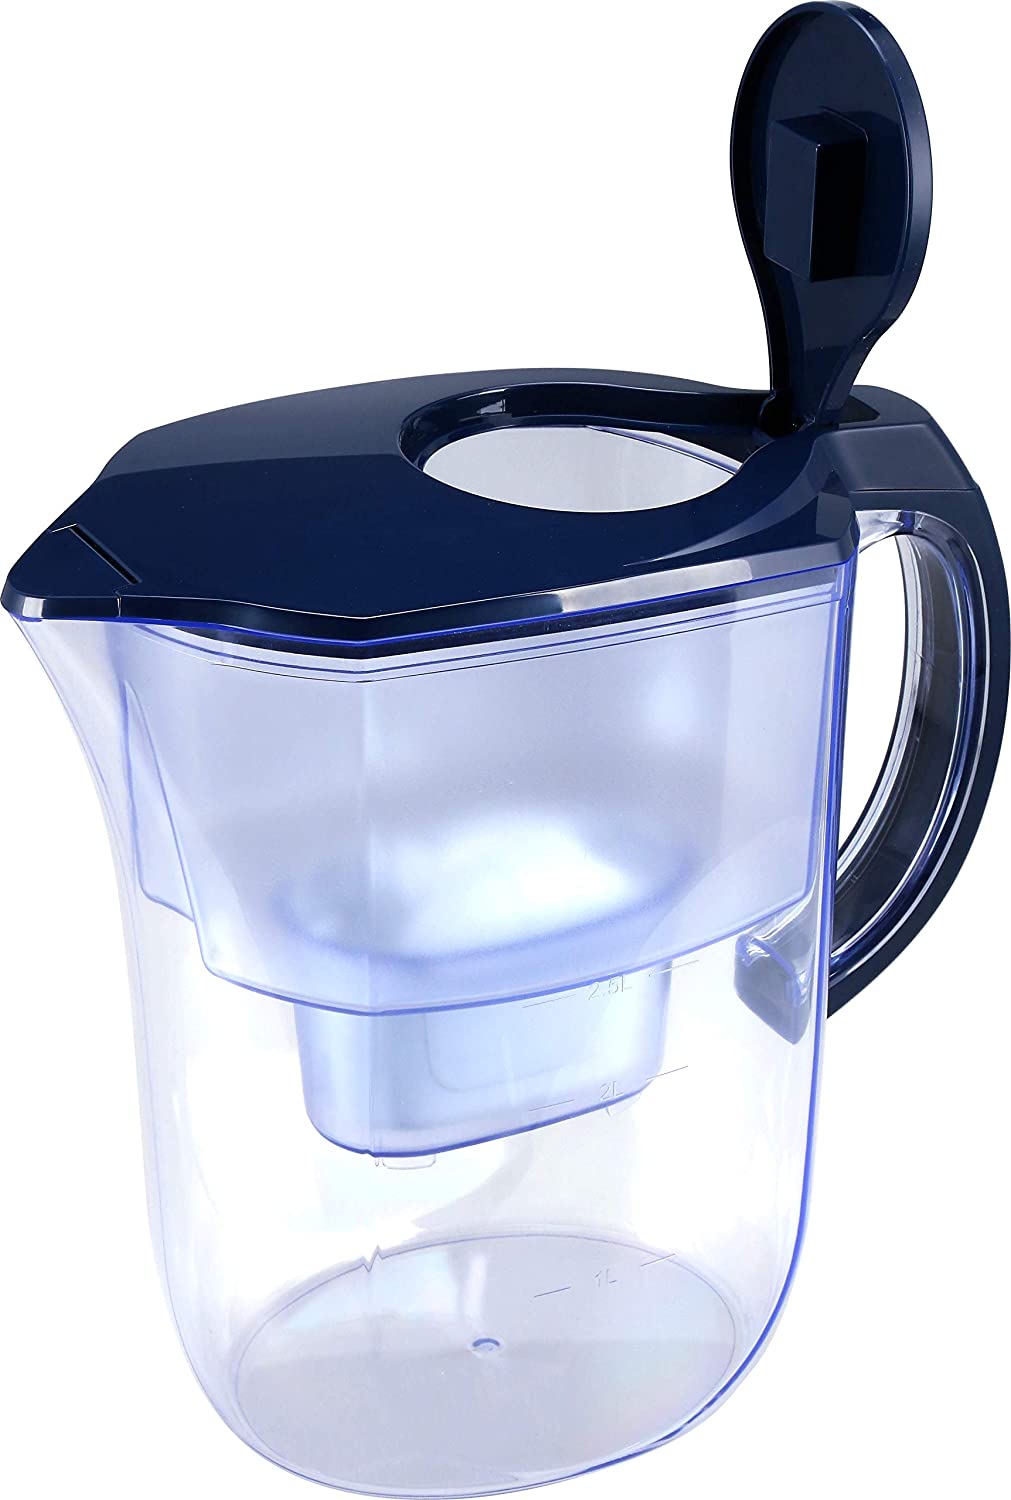 Ehm Ultra Premium Alkaline water Filter Pitcher - 3.8L, Activated Carbon Filter- BPA Free, Healthy, Clean, & Toxin-Free Mineralized Alkaline Water in Minutes- Up to 9.5 pH-2021